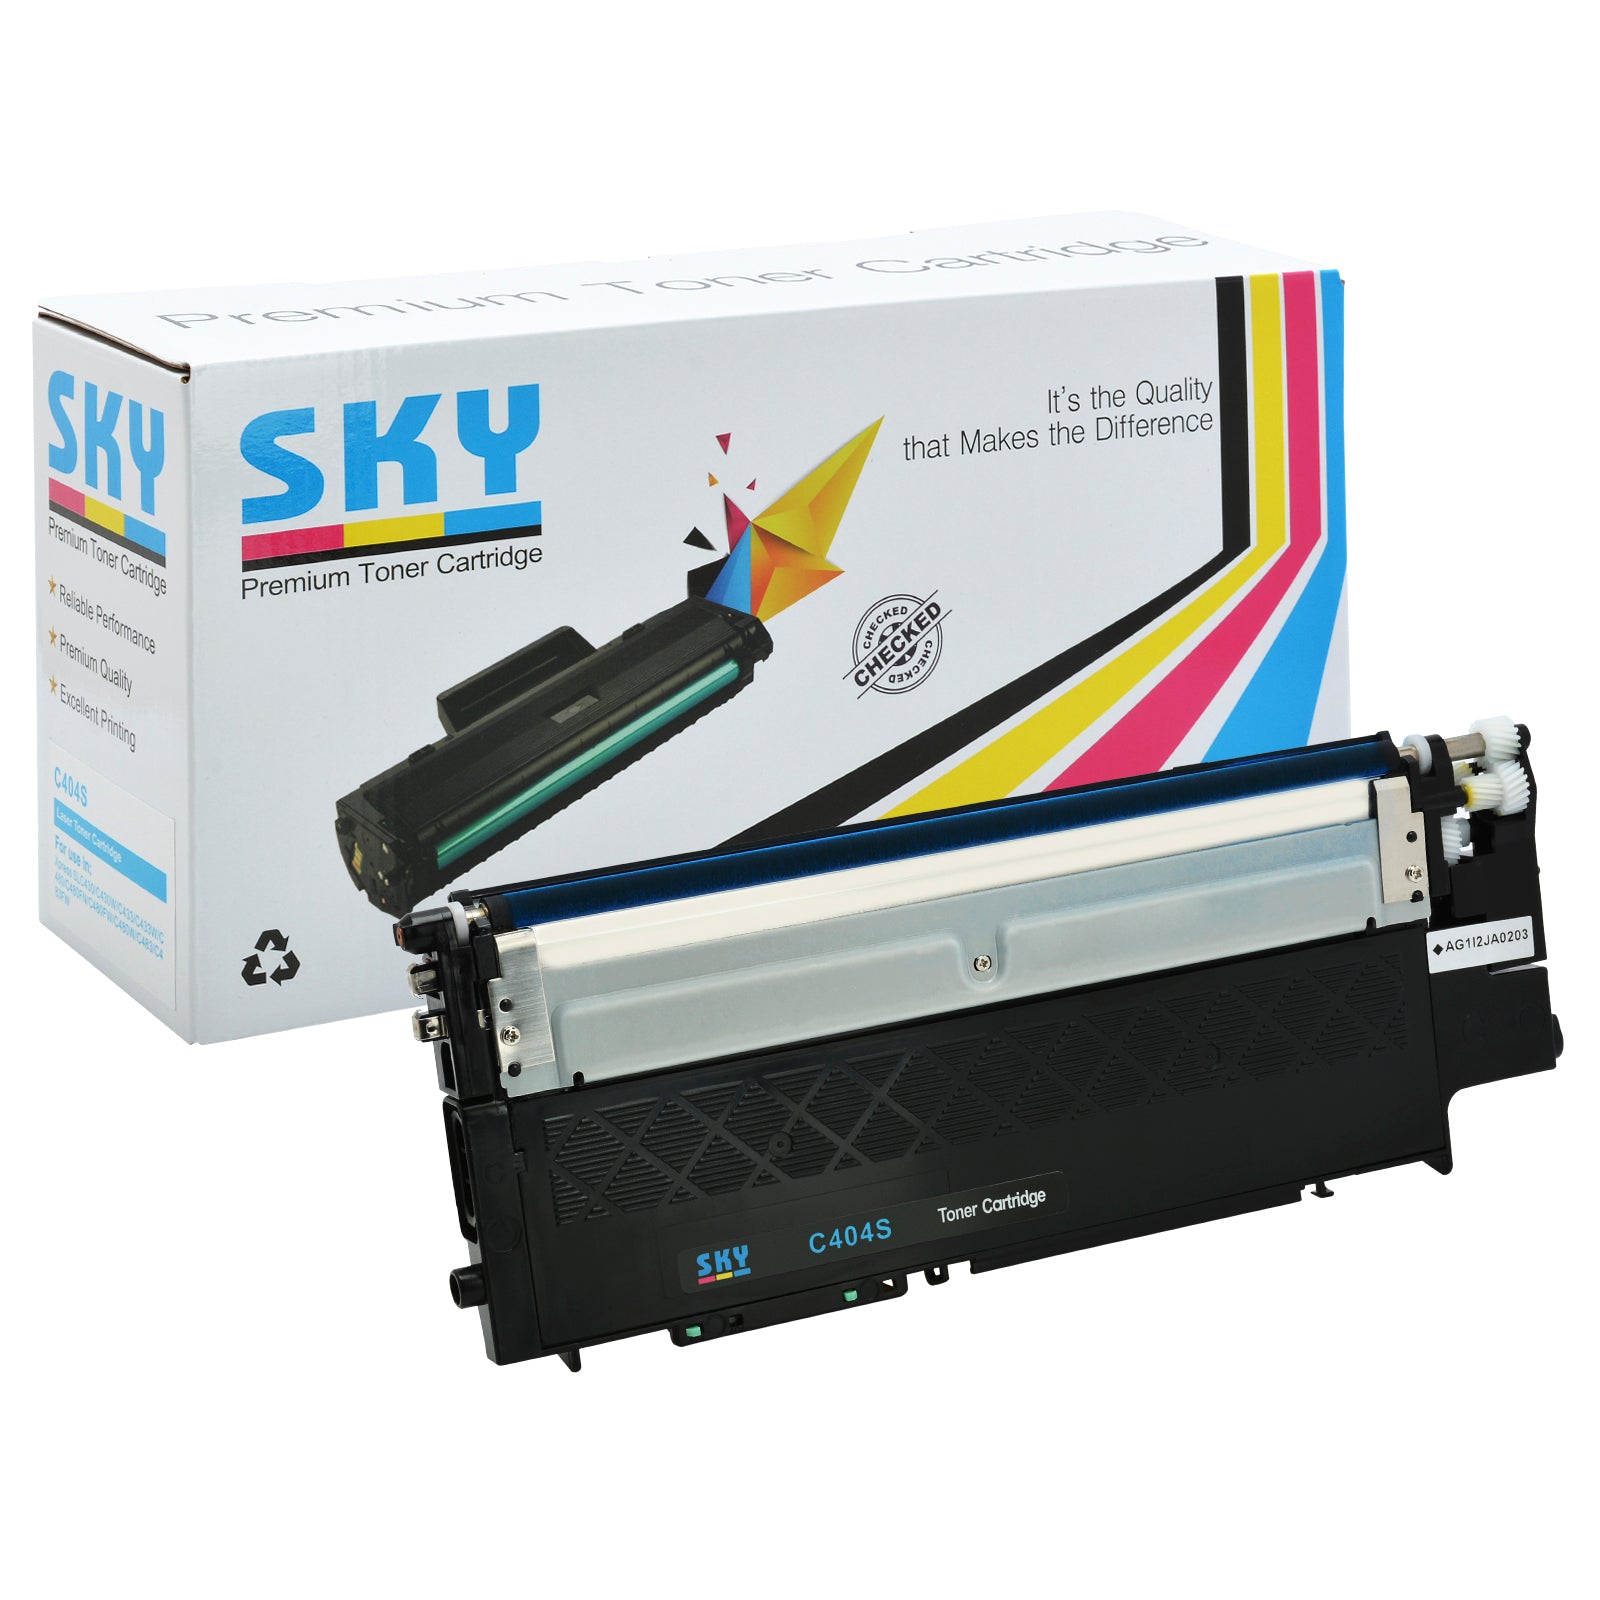 SKY  404  Compatible Toner Cartridge for Samsung Xpress C430 and C480 series Printers